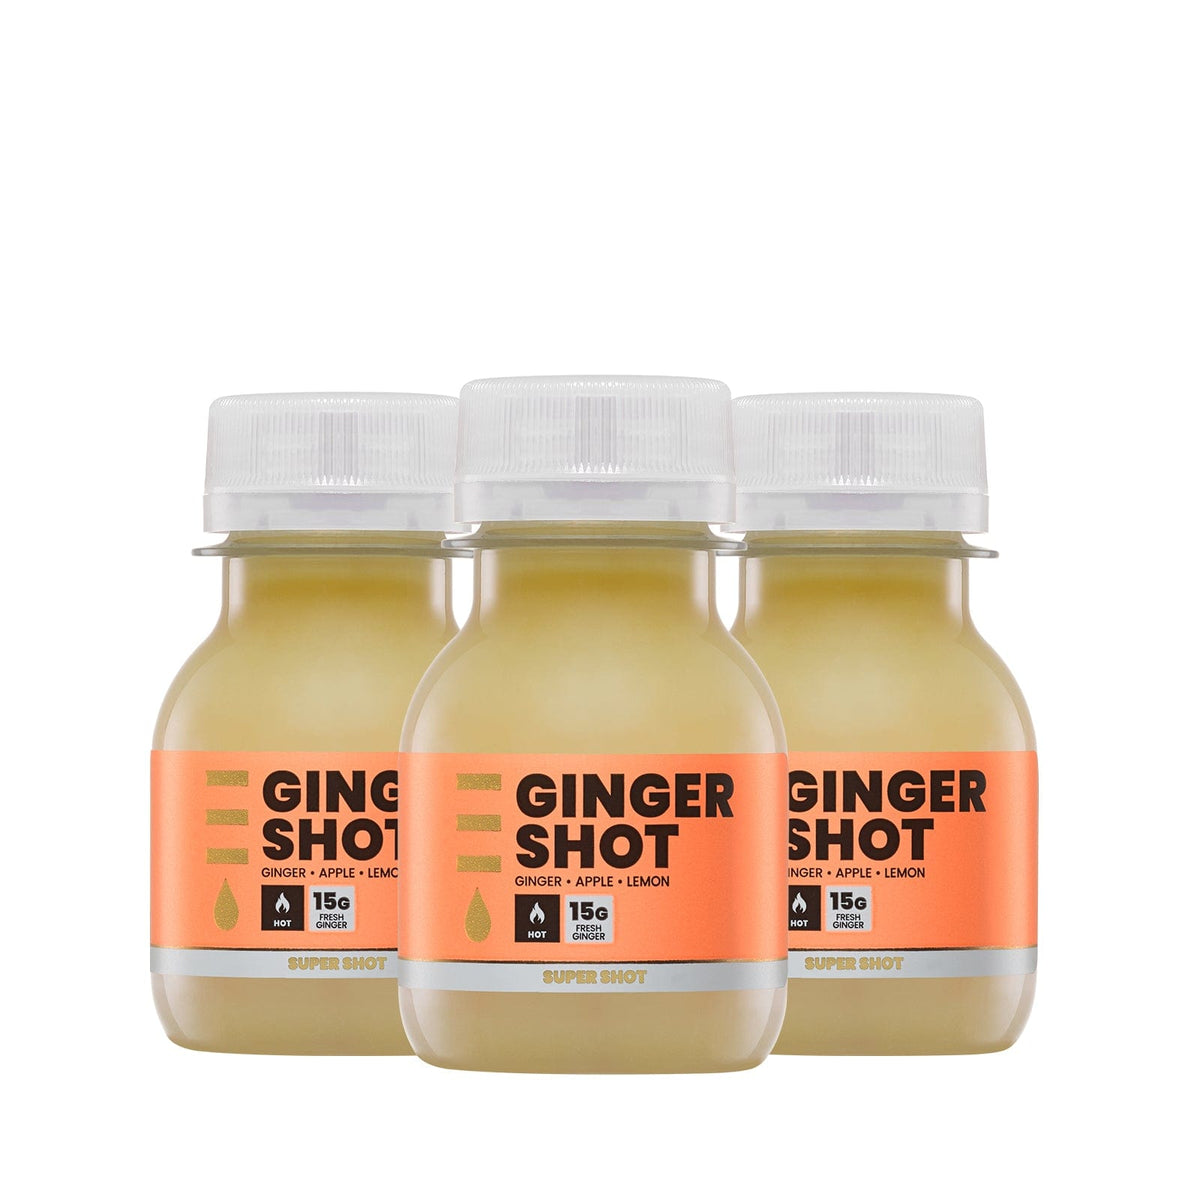 The Daily Ginger Shot